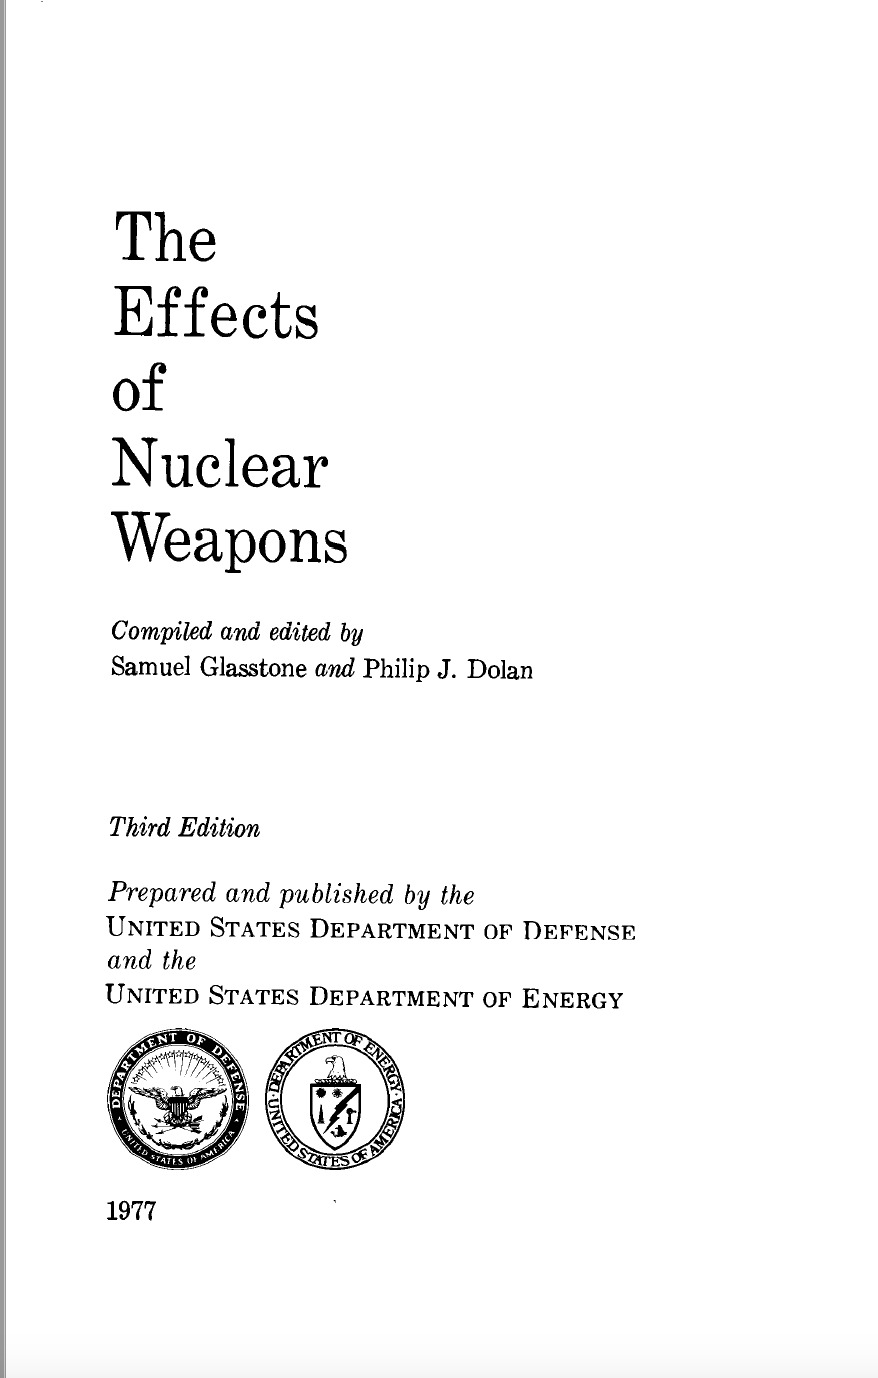 660 Page 1977 The Effects of Nuclear Weapons Third Edition Manual on Data CD